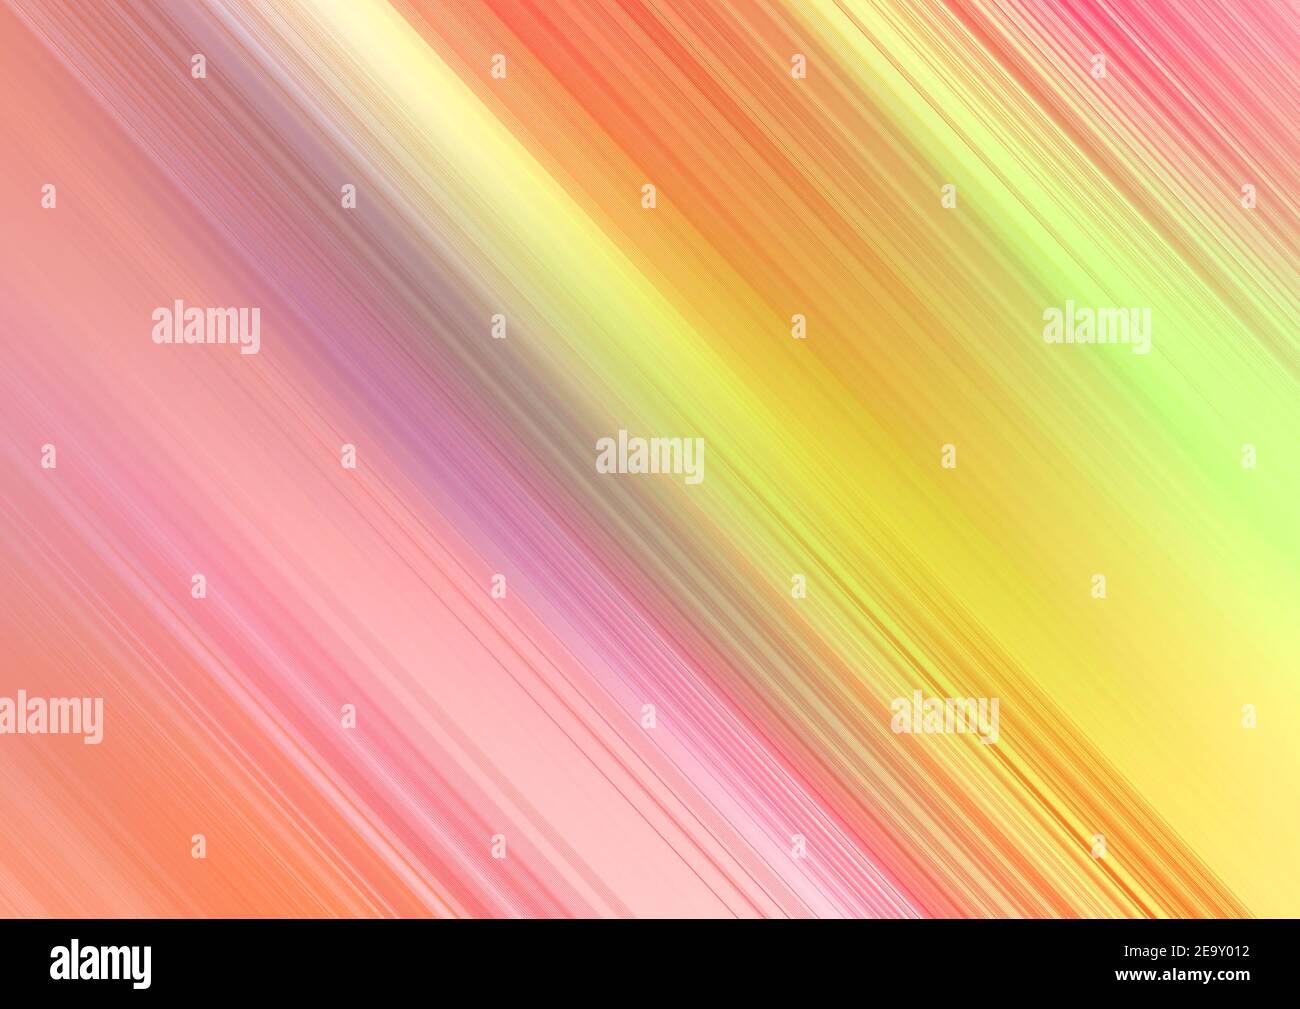 purple pink red  yellow orange motion blur abstract background Stock Photo